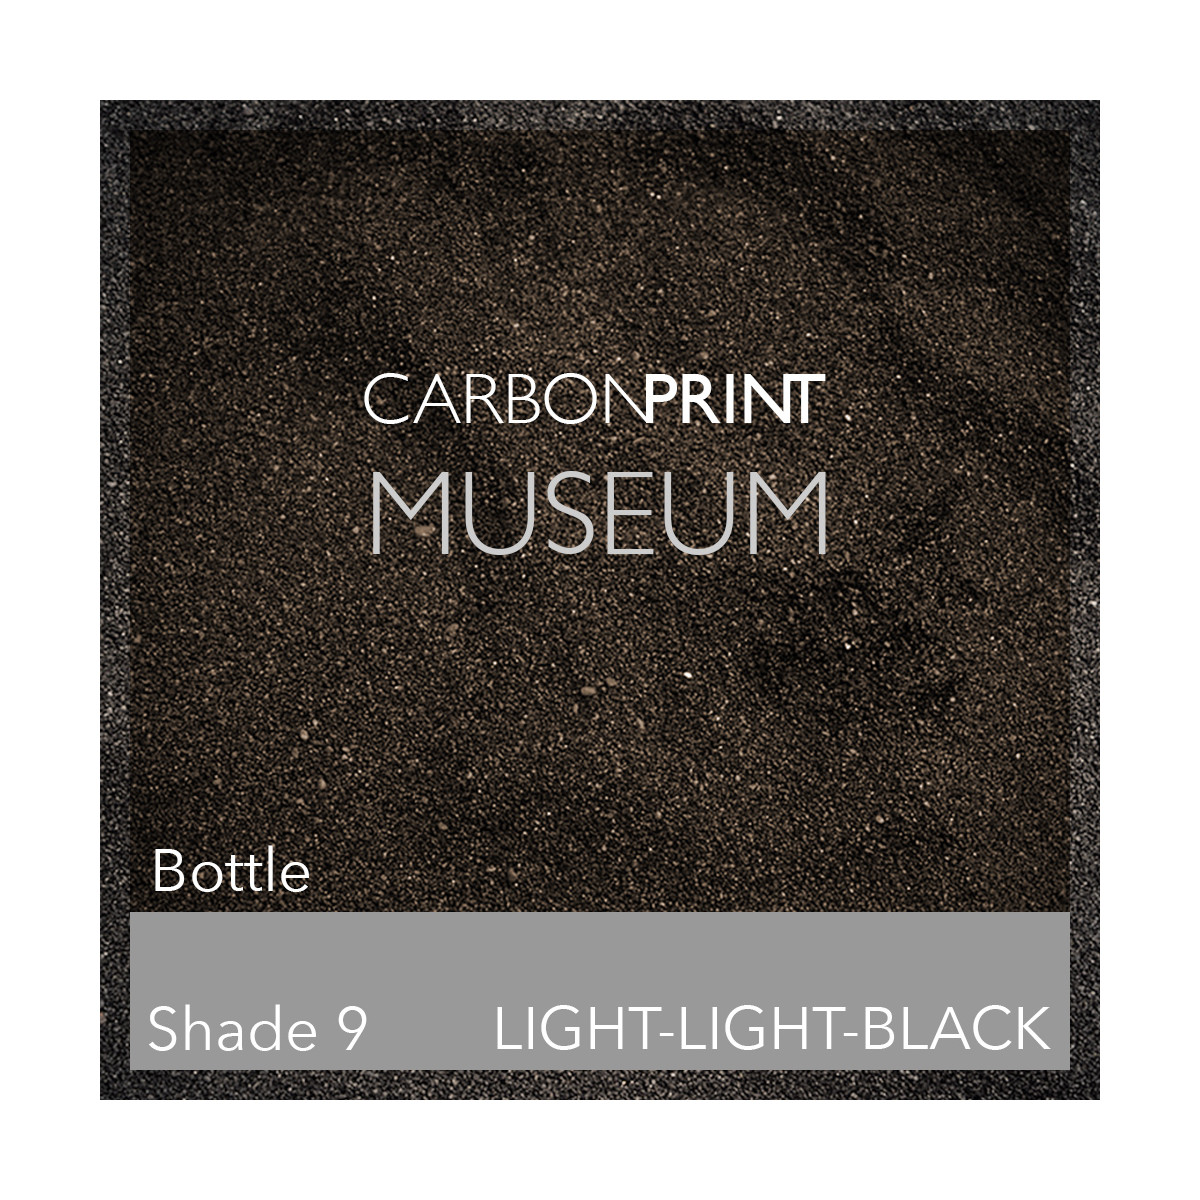 Carbonprint Museum Shade9 Channel LLK / LGY